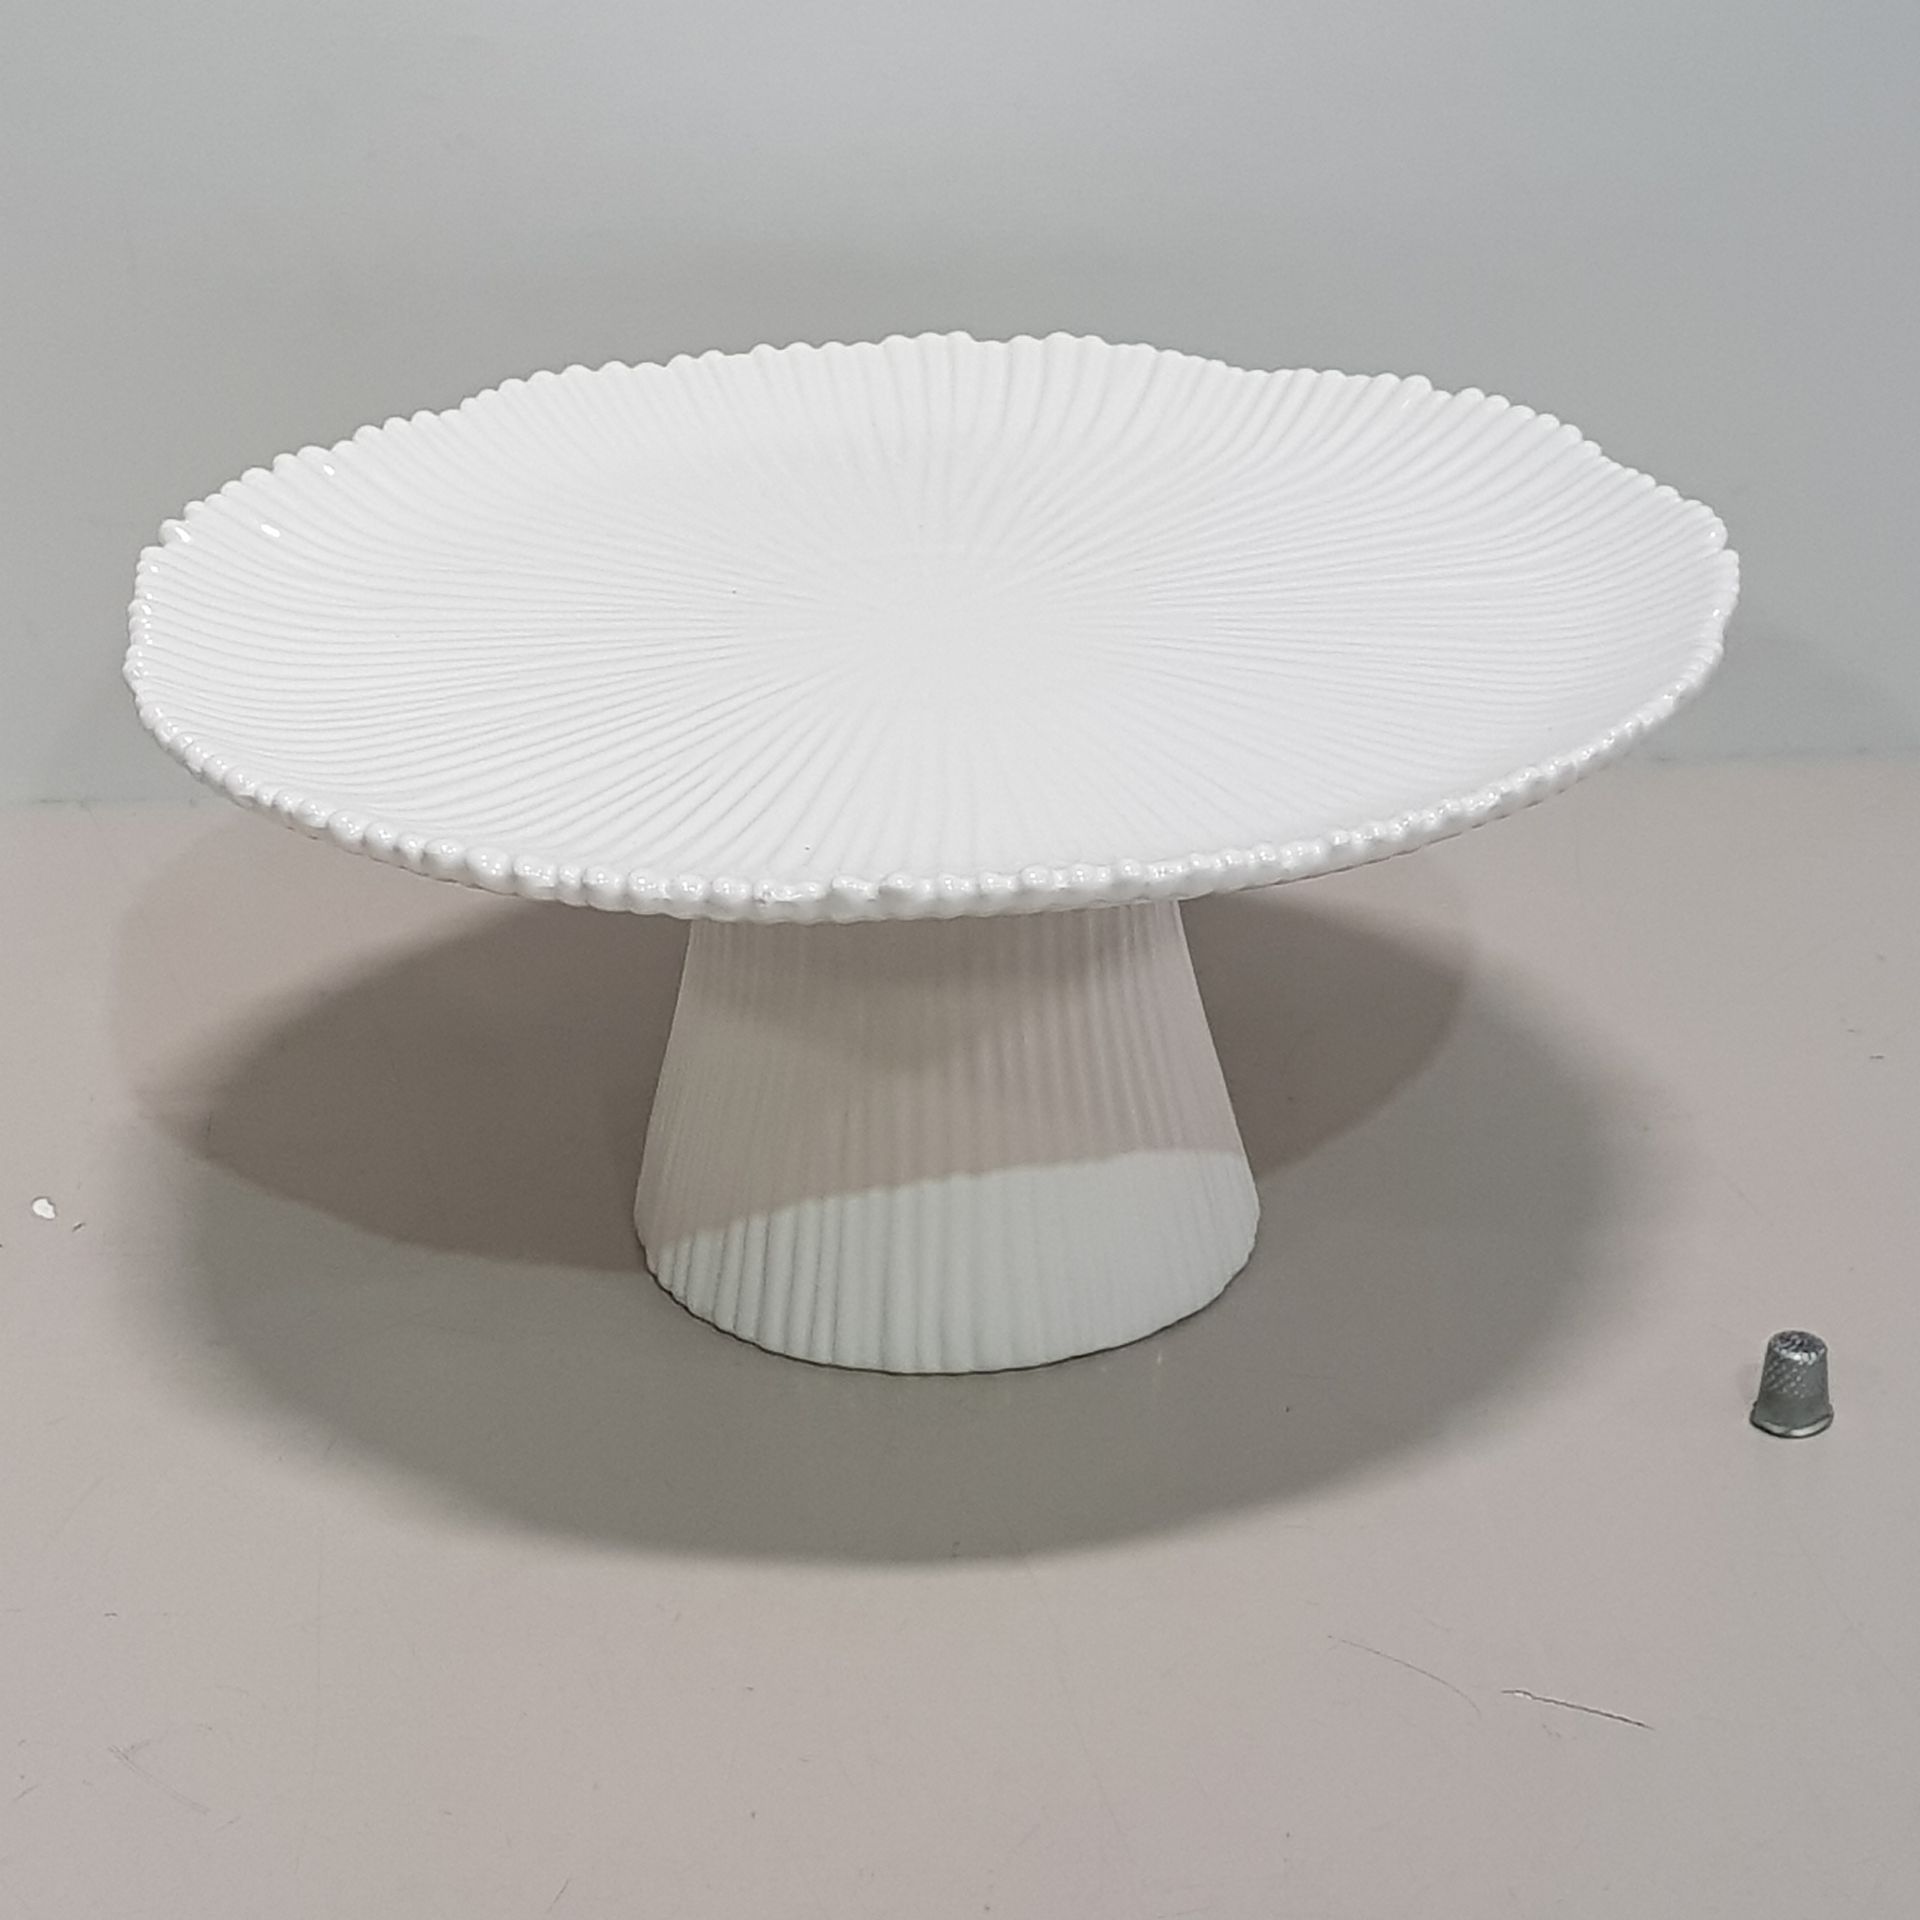 24 X BRAND NEW THE VINTAGE GARDEN ROOM WHITE CERAMIC CAKE STANDS IN 12 BOXES SIZE - 35CM X 16CM